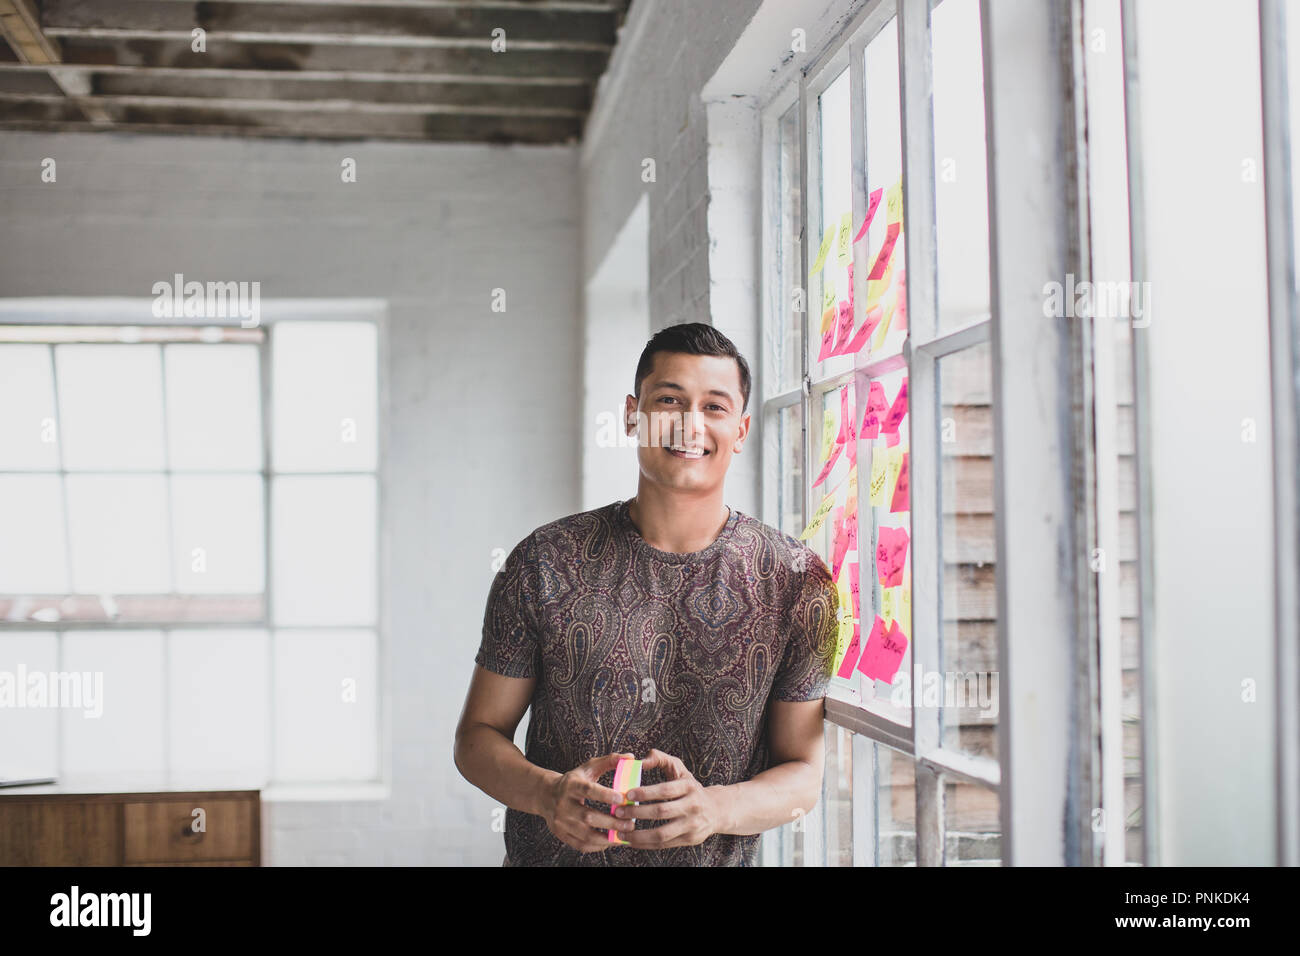 Portrait of young adult male brainstorming in a creative office with adhesive notes Stock Photo